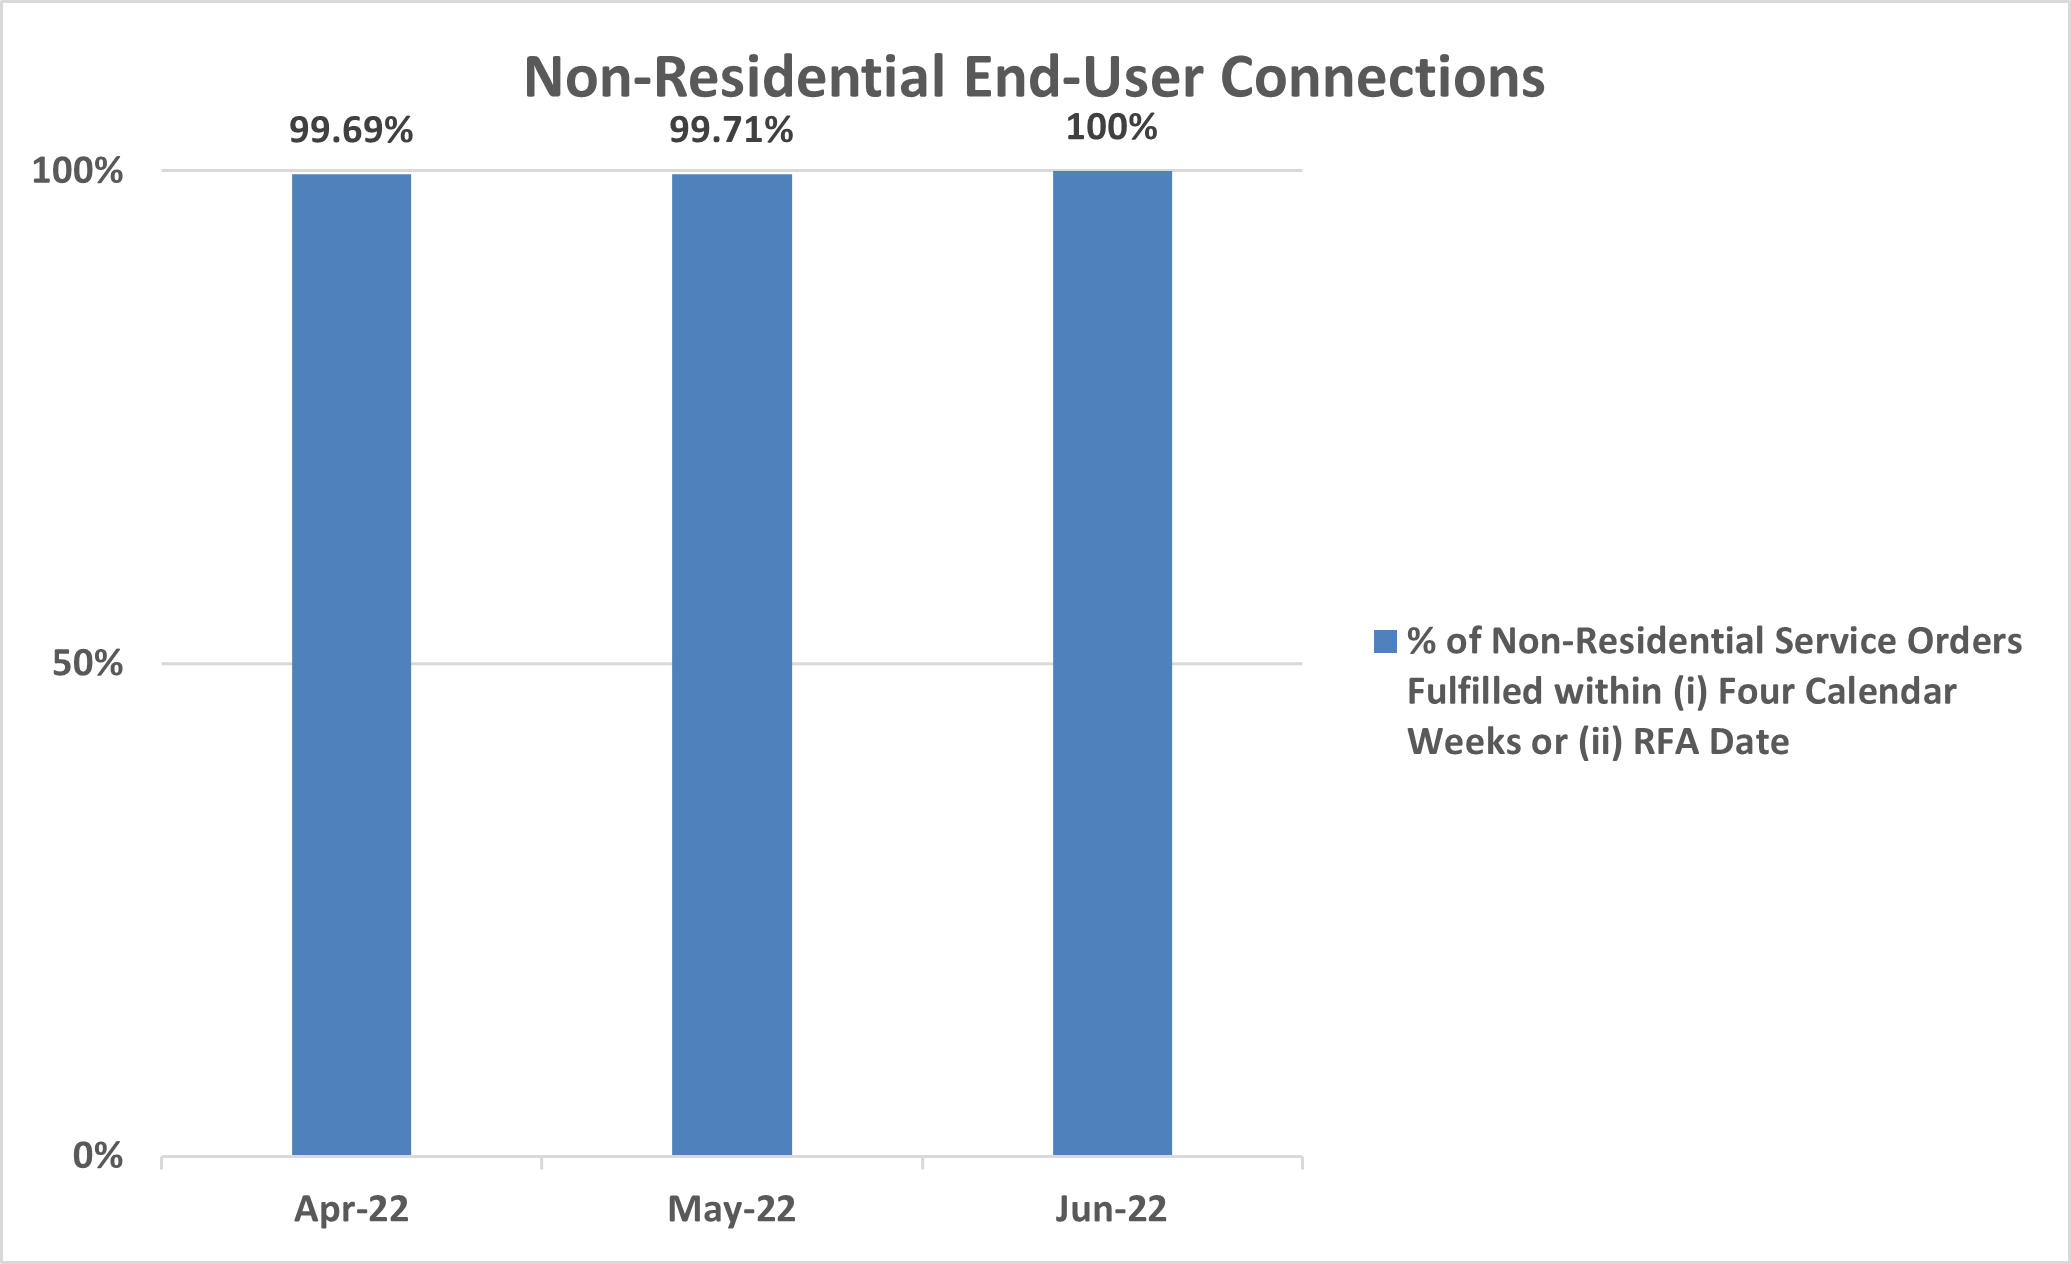 Non-Residential End User Connections